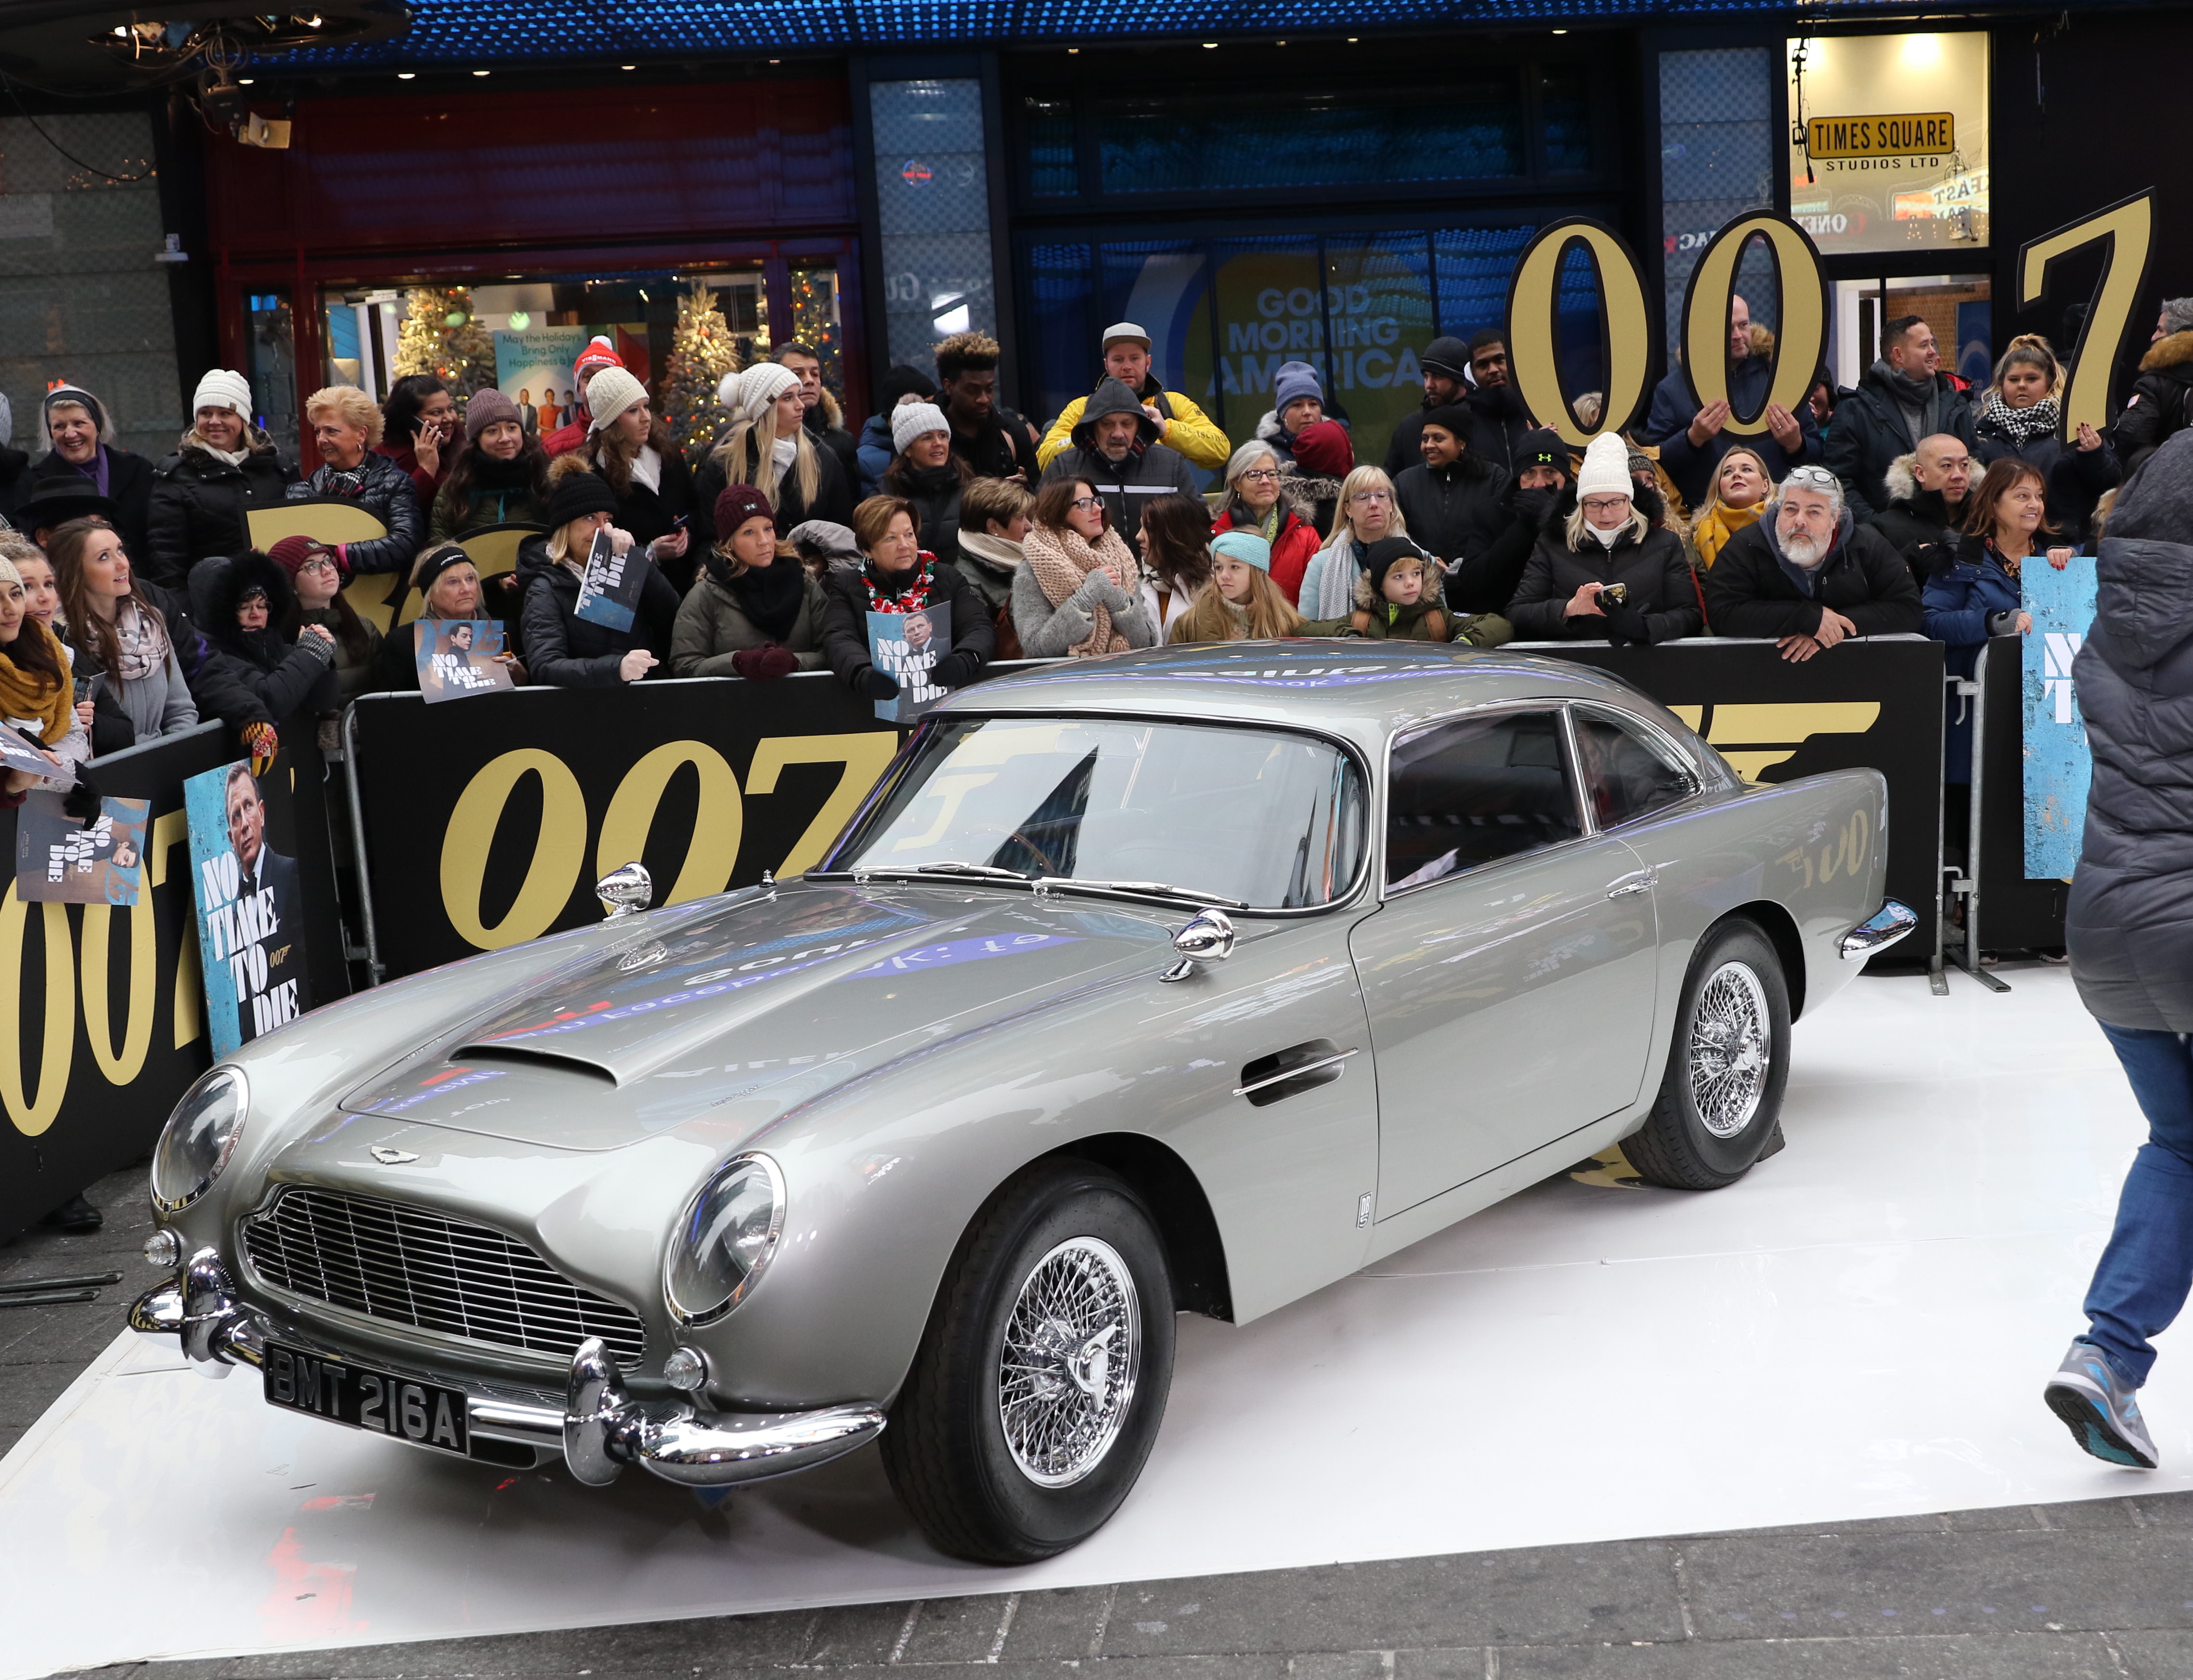 'No Time to Die' is Daniel Craig's swan song as James Bond. How will it end for this 007?